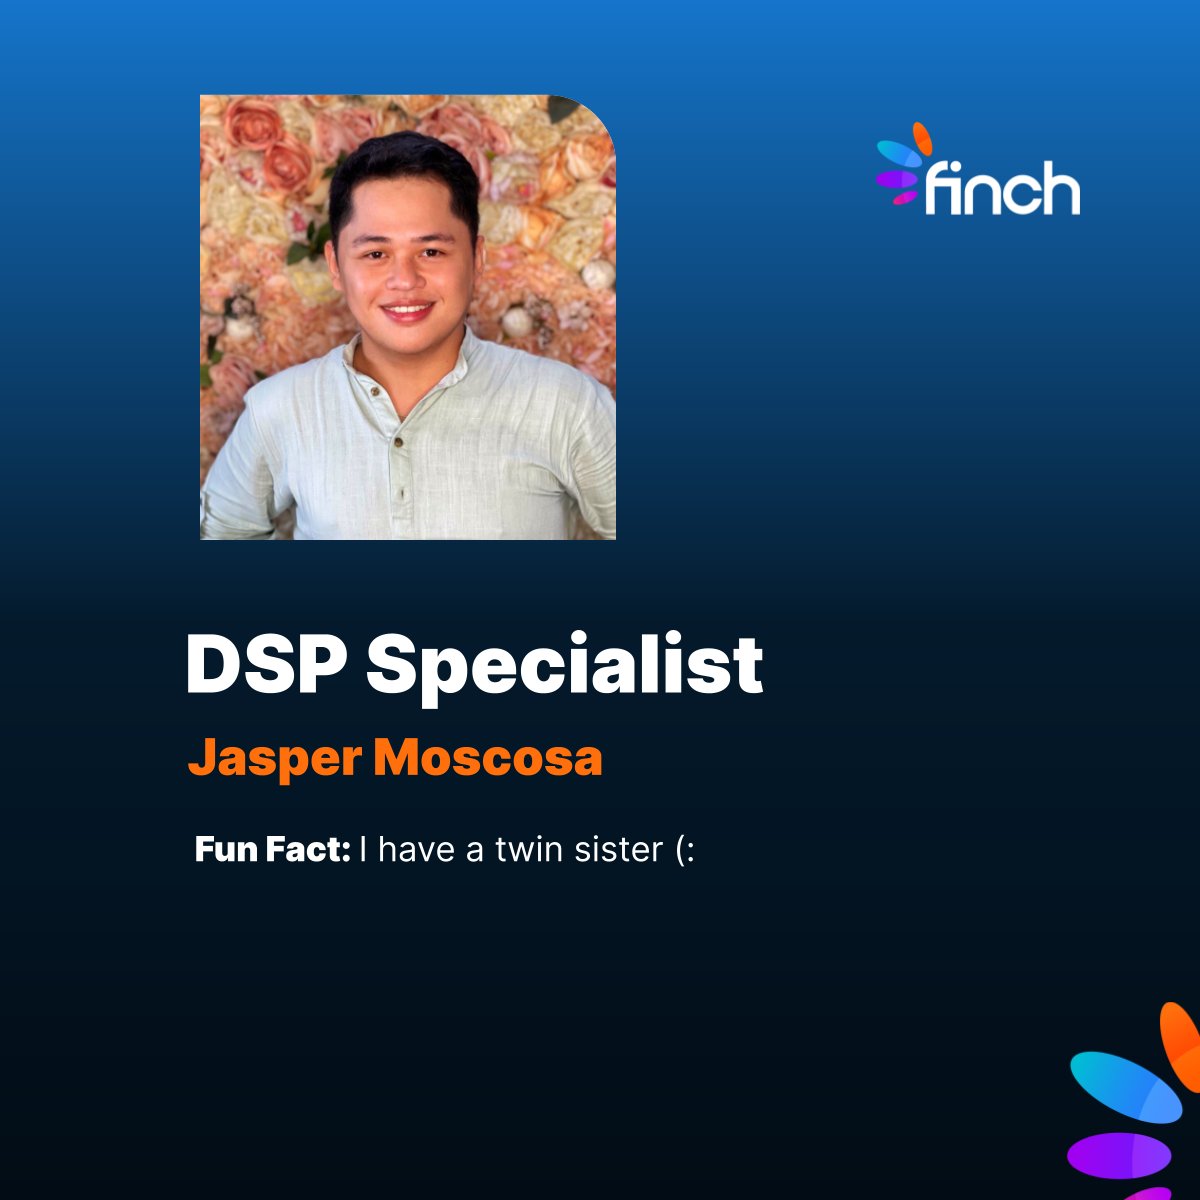 New Year just got cooler with Jasper Moscosa! Meet our Associate DSP Specialist who spices up tech, grows greens (basil, chilis, you name it!), and shares twintastic vibes. Double the skills, double the fun! #EmployeeSpotlight #ExpertiseInAction